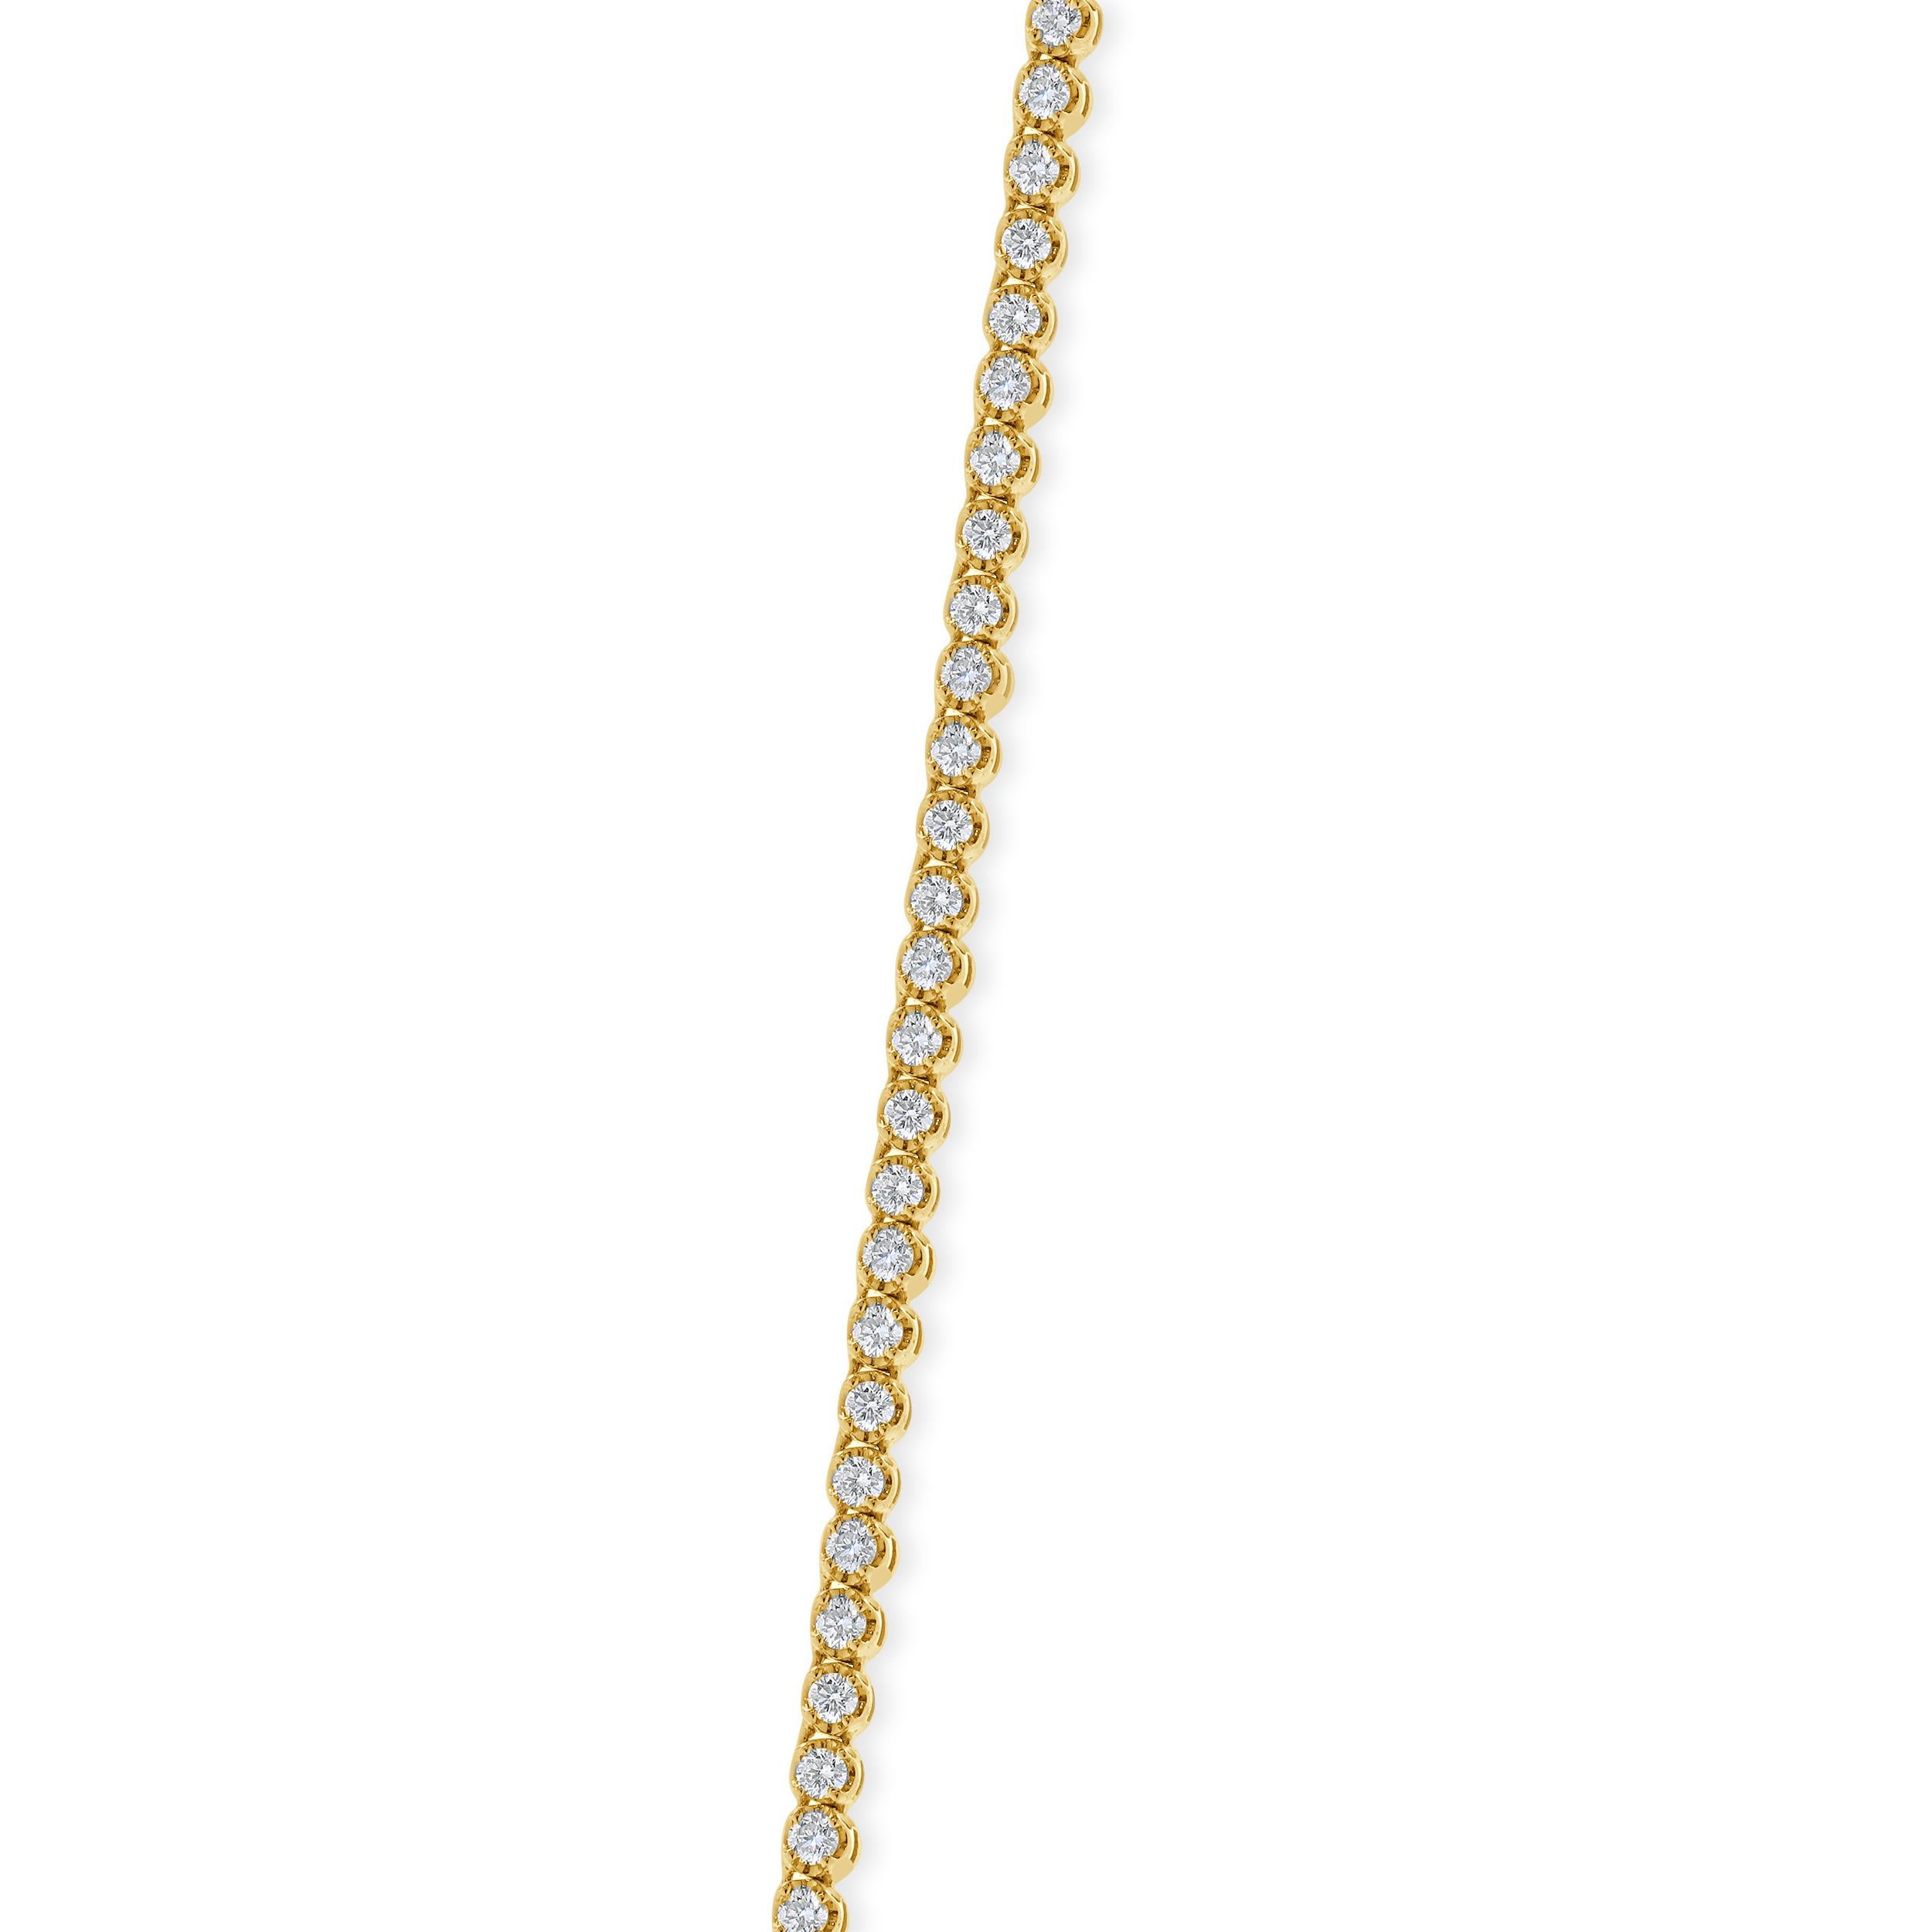 Designer: custom
Material: 14K yellow gold
Diamonds: 177 round brilliant = 3.51cttw
Color: G
Clarity: VS
Dimensions: necklace measures 18-inches in length 
Weight: 17.71 grams
